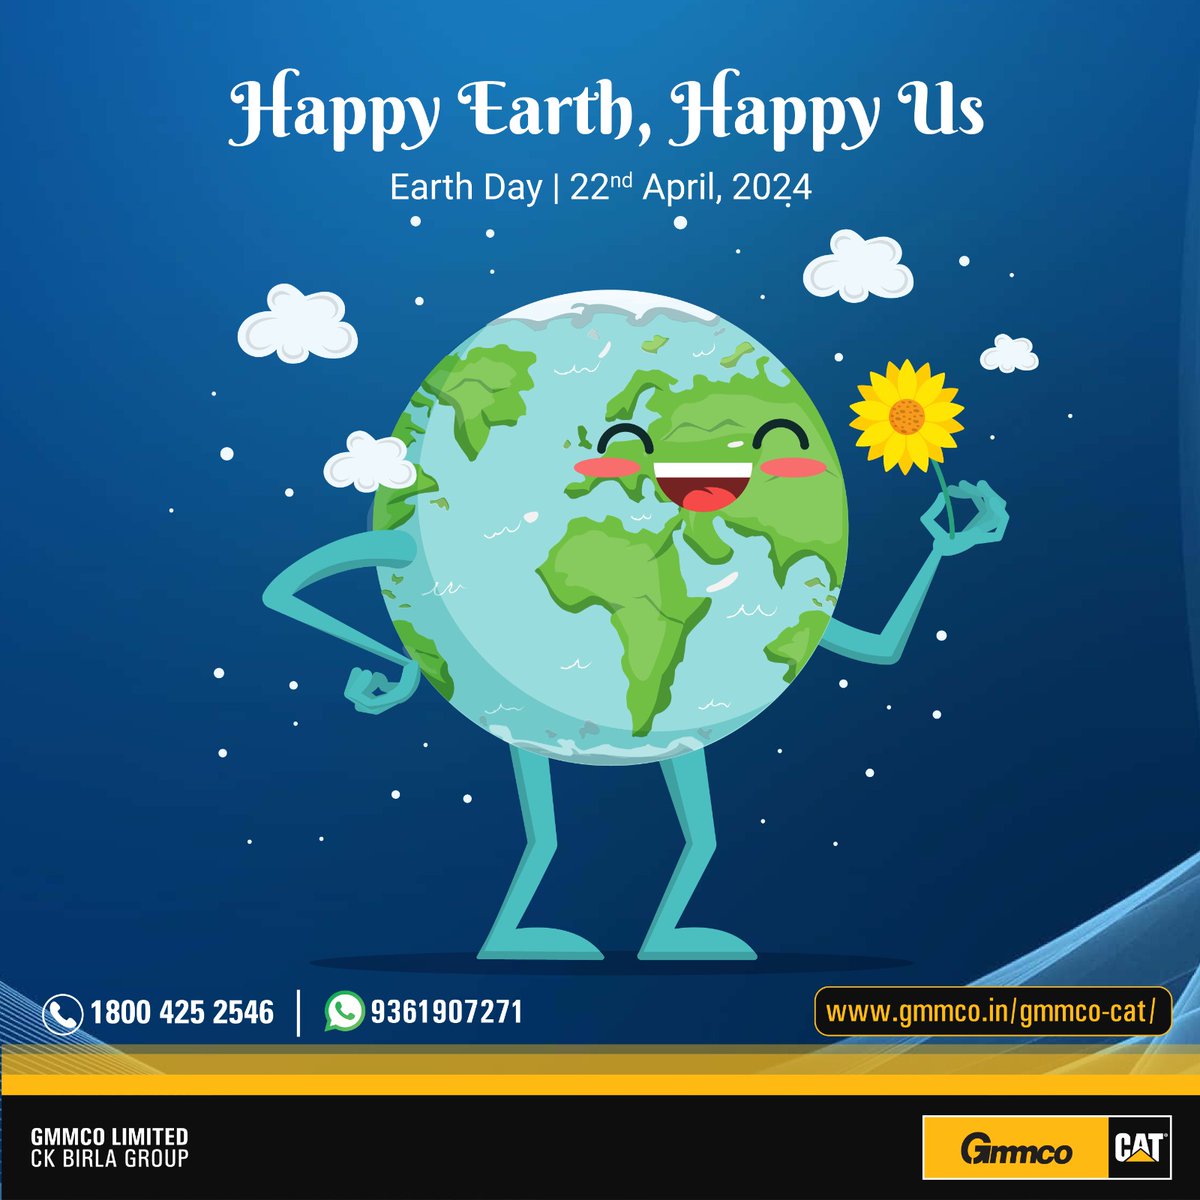 The happier the Earth, the brighter our future. Let's take action now to ensure a joyful, sustainable planet.

#Gmmco #GmmcoCat #Caterpillar #EarthDay #EarthDay2022 #Sustainablefuture #NurtureEarth #sustainableearth